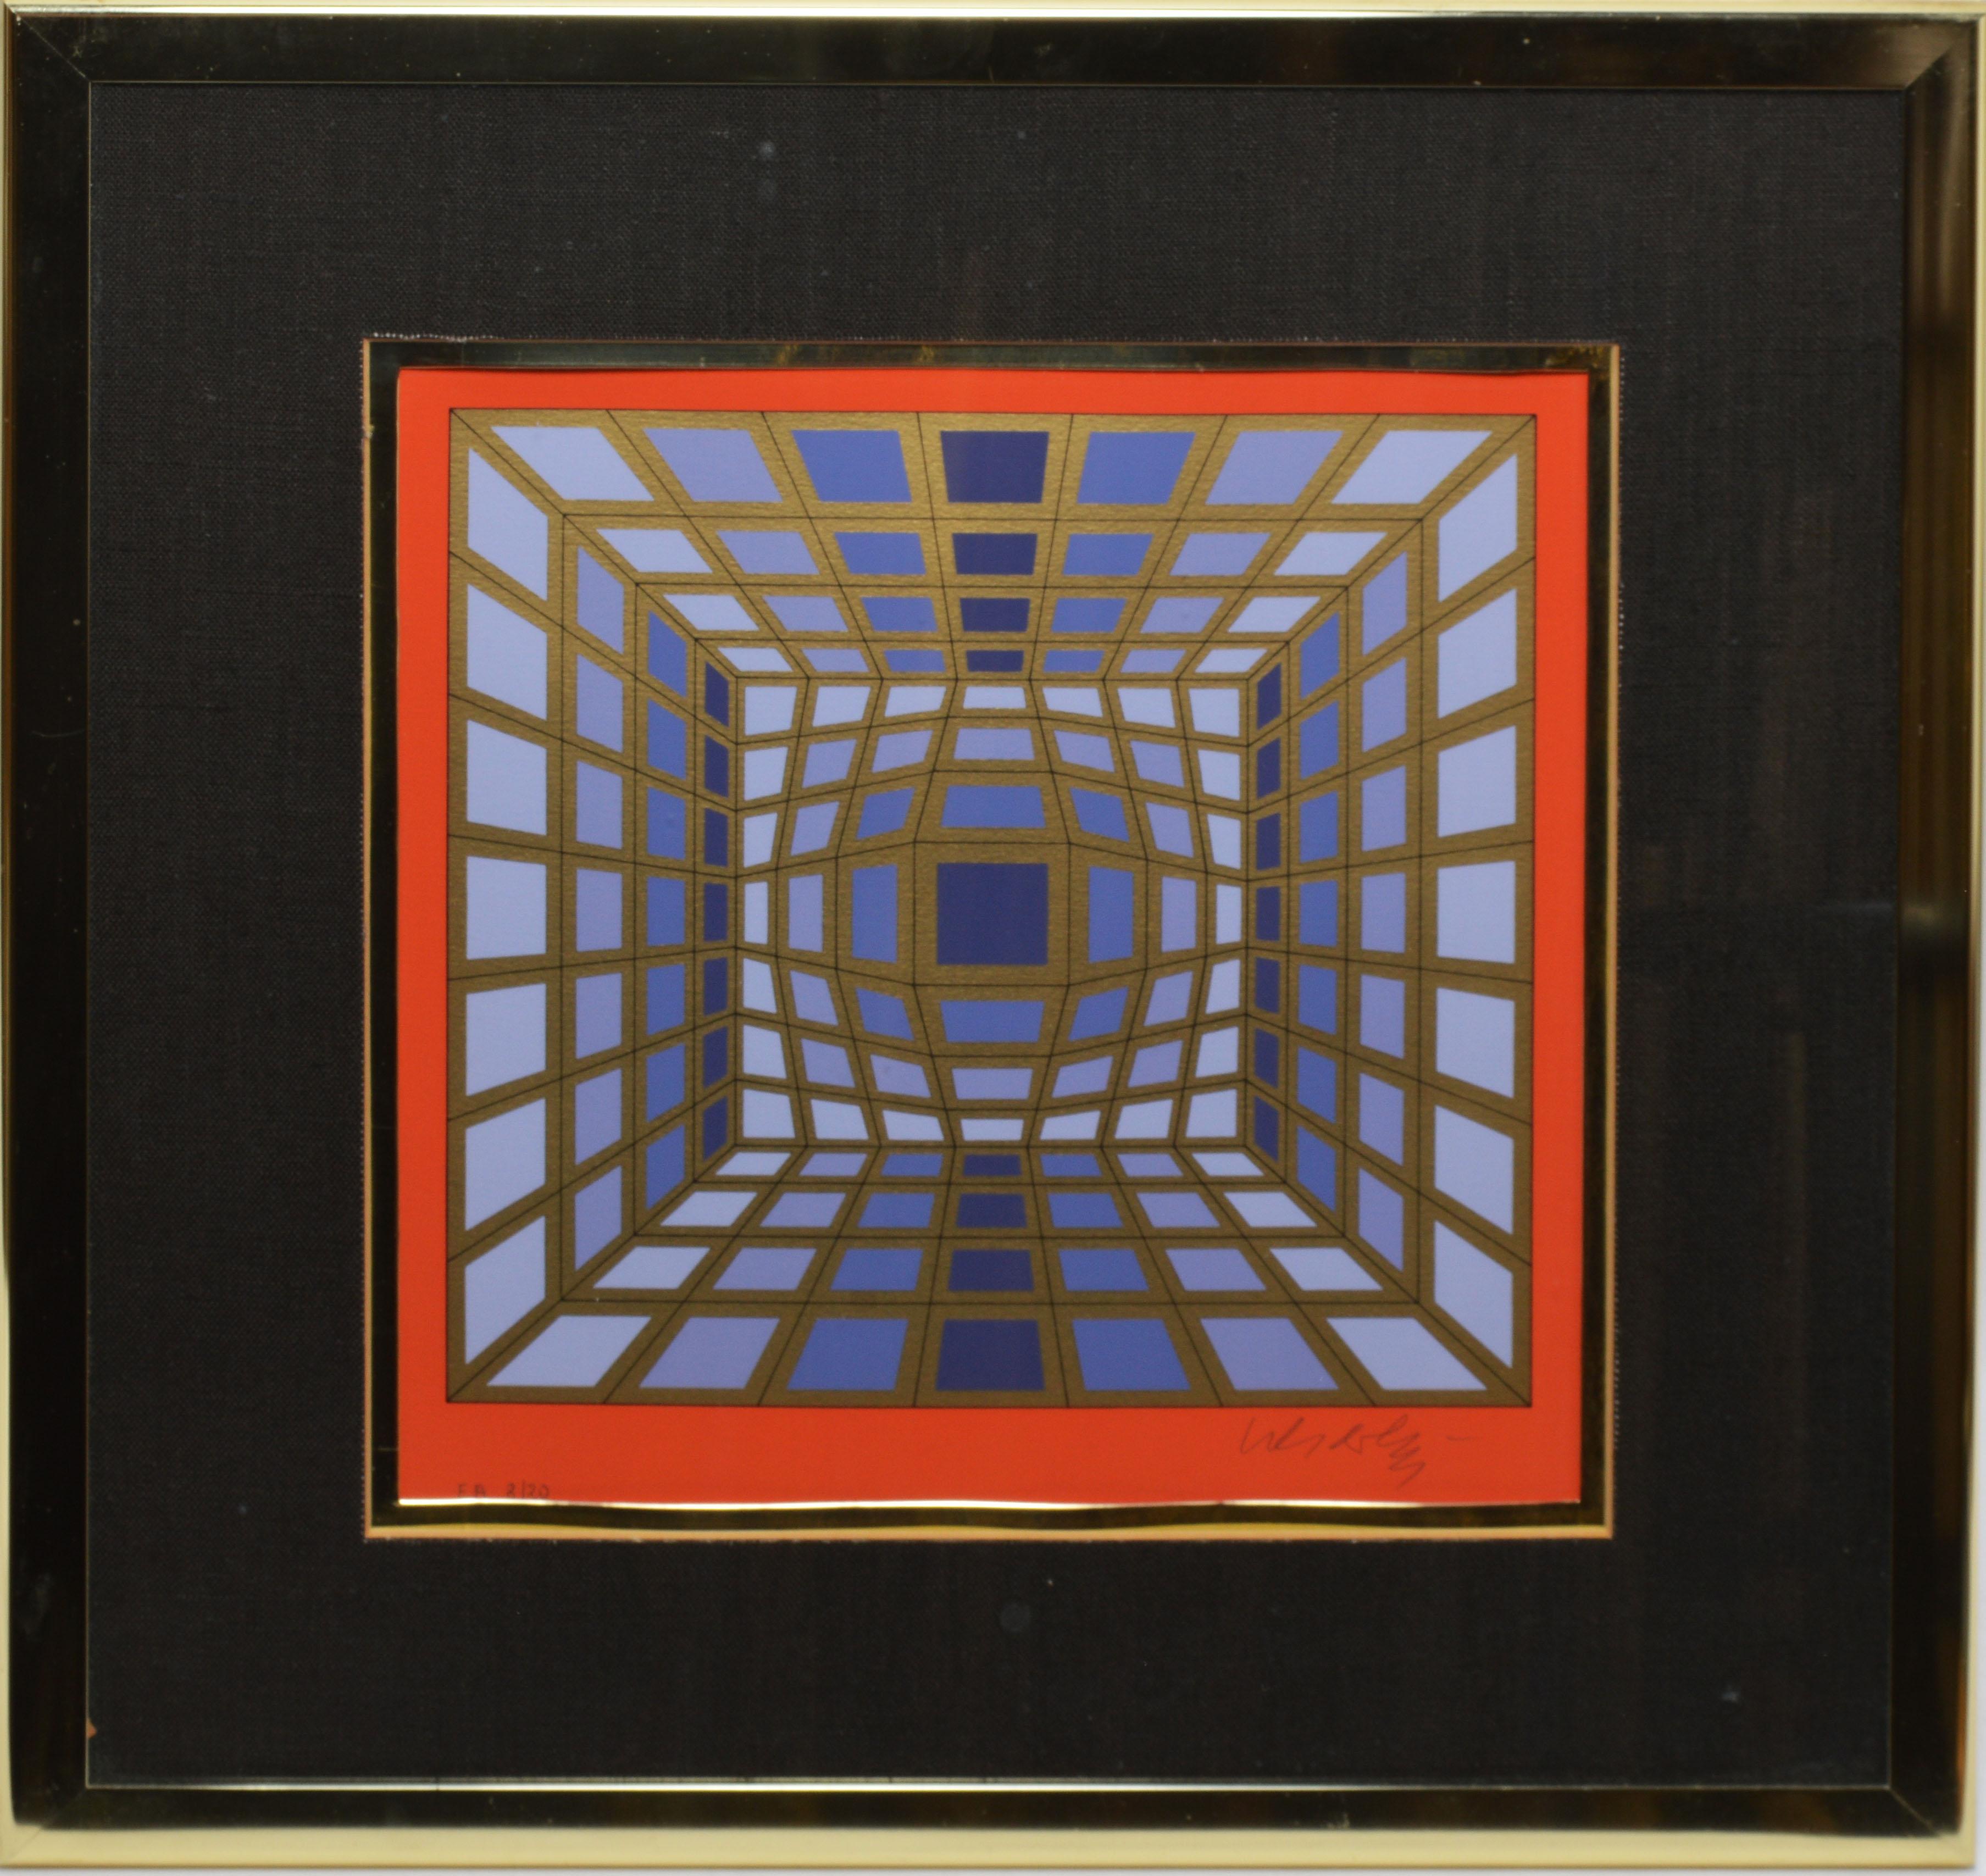 Vintage abstract lithograph by Victor Vasarely  (1906 - 1997) .  Signed and numbered.  Displayed in a giltwood frame.  Image, 11"L x 11"H, overall 19"L x 19"H.